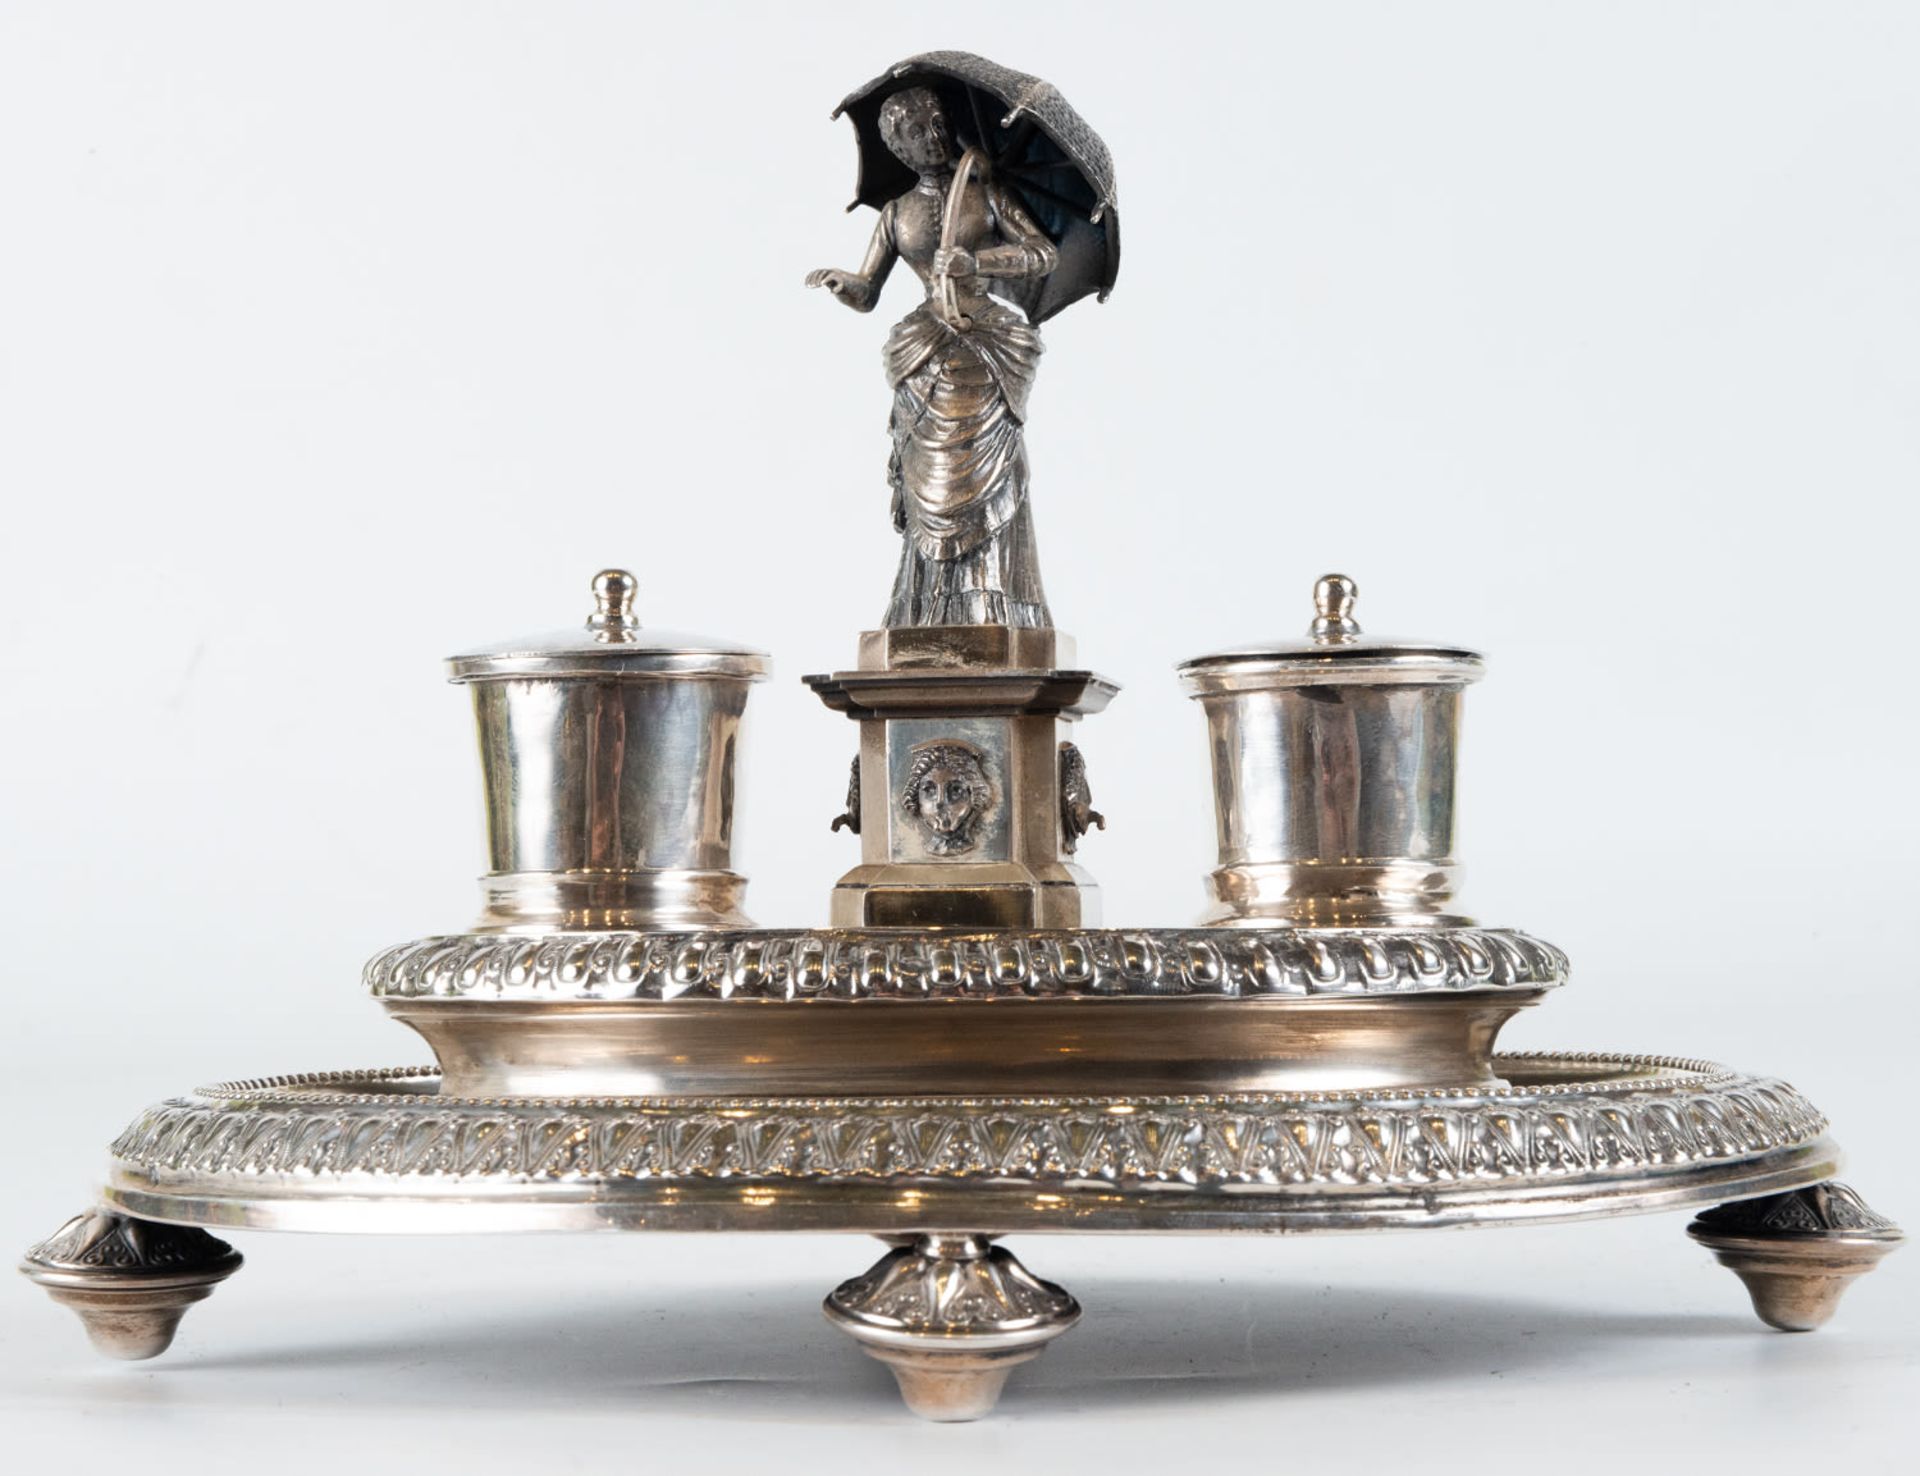 Writing Set with Lady and parasol, in 800 silver